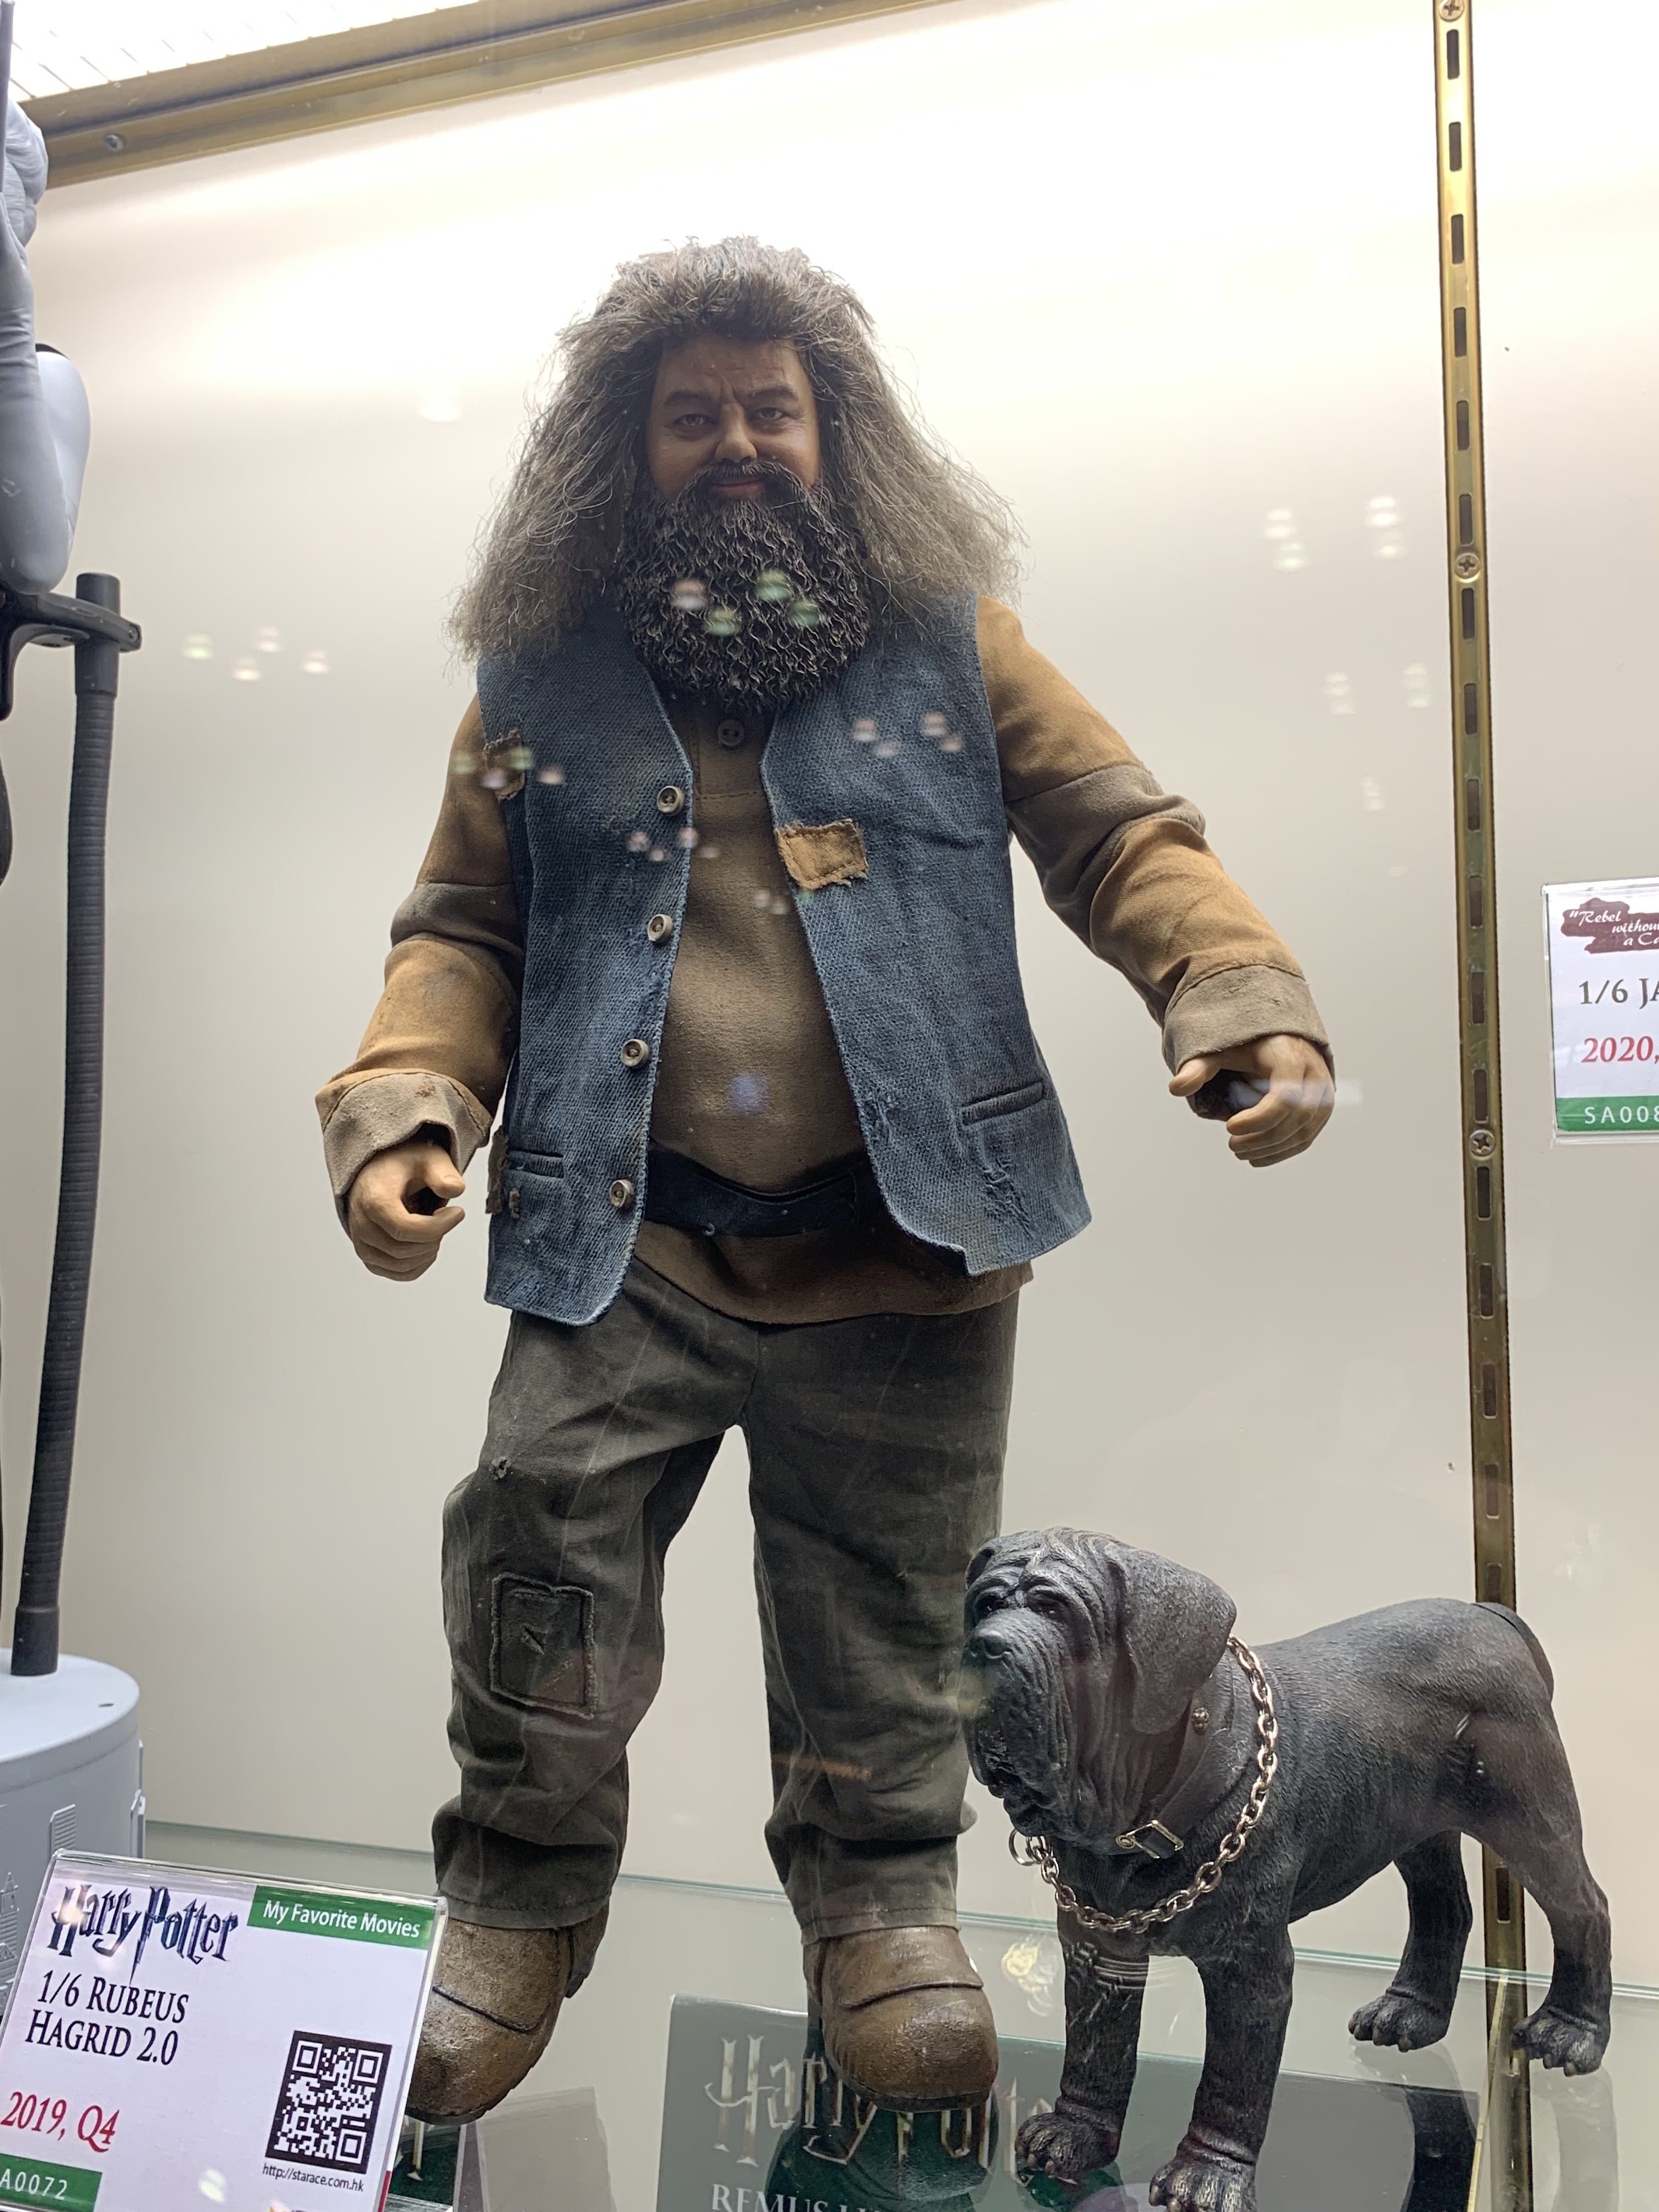 The Hagrid figurine is complemented with a figurine of Fang.